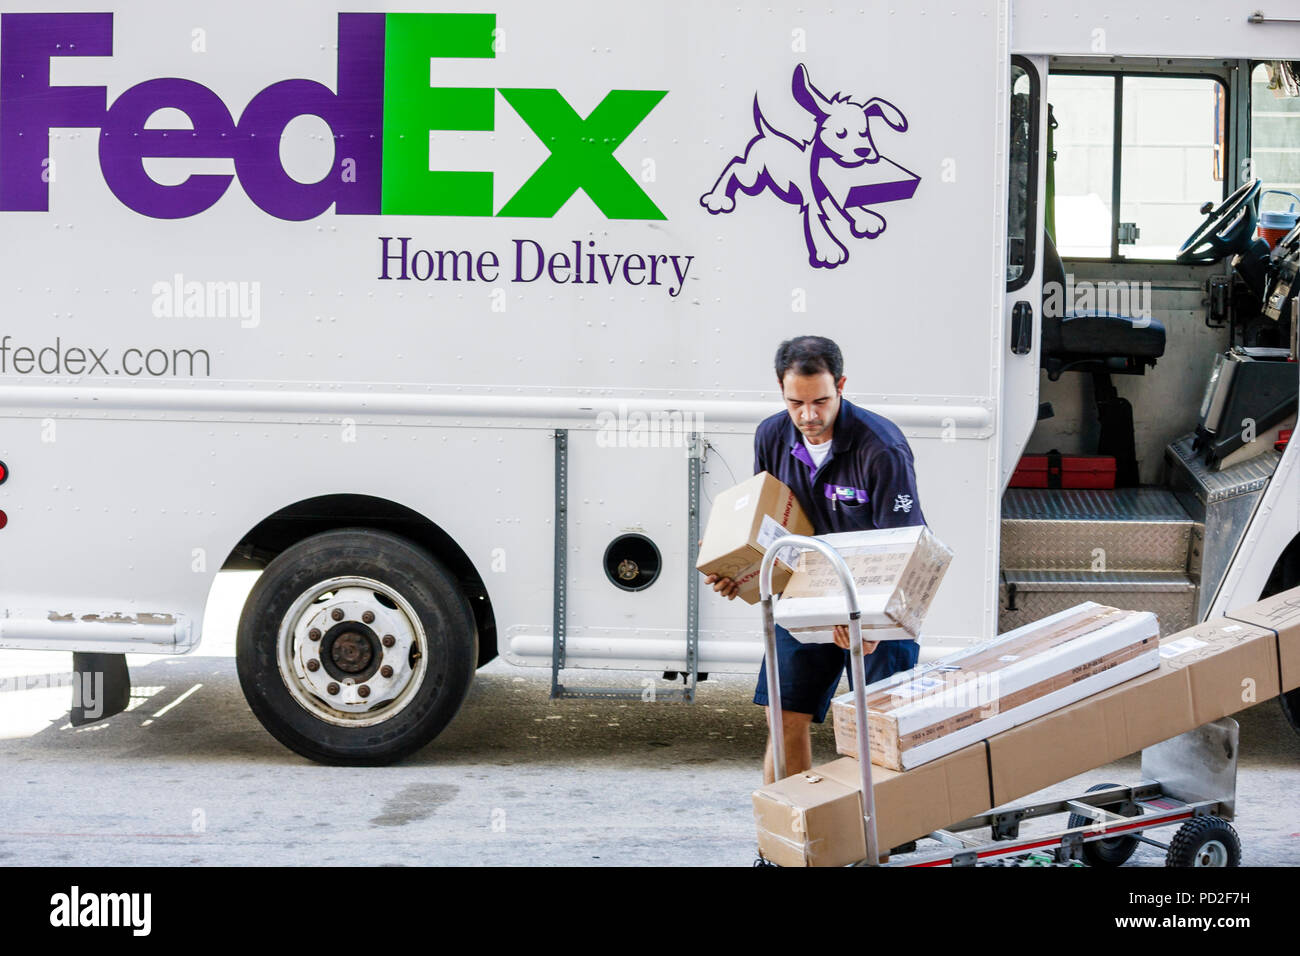 Miami Beach Florida,FedEx,worldwide,company,shipping,Hispanic ethnic man men male adult adults,worker,workers,courier,truck,driver,hand truck cart,dol Stock Photo